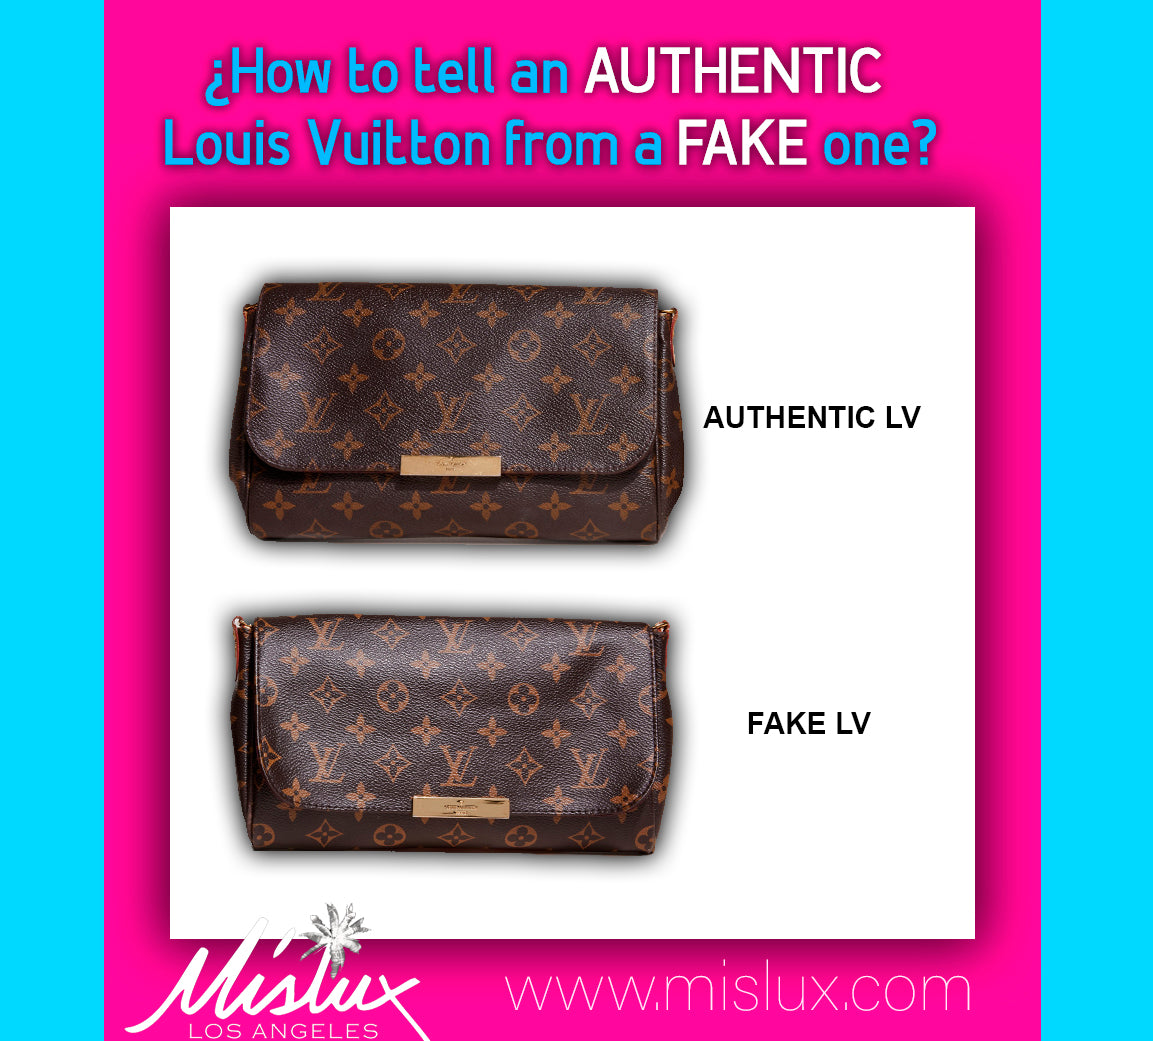 How to an AUTHENTIC Louis Vuitton bag from a FAKE one? - Look the stamps! - MISLUX